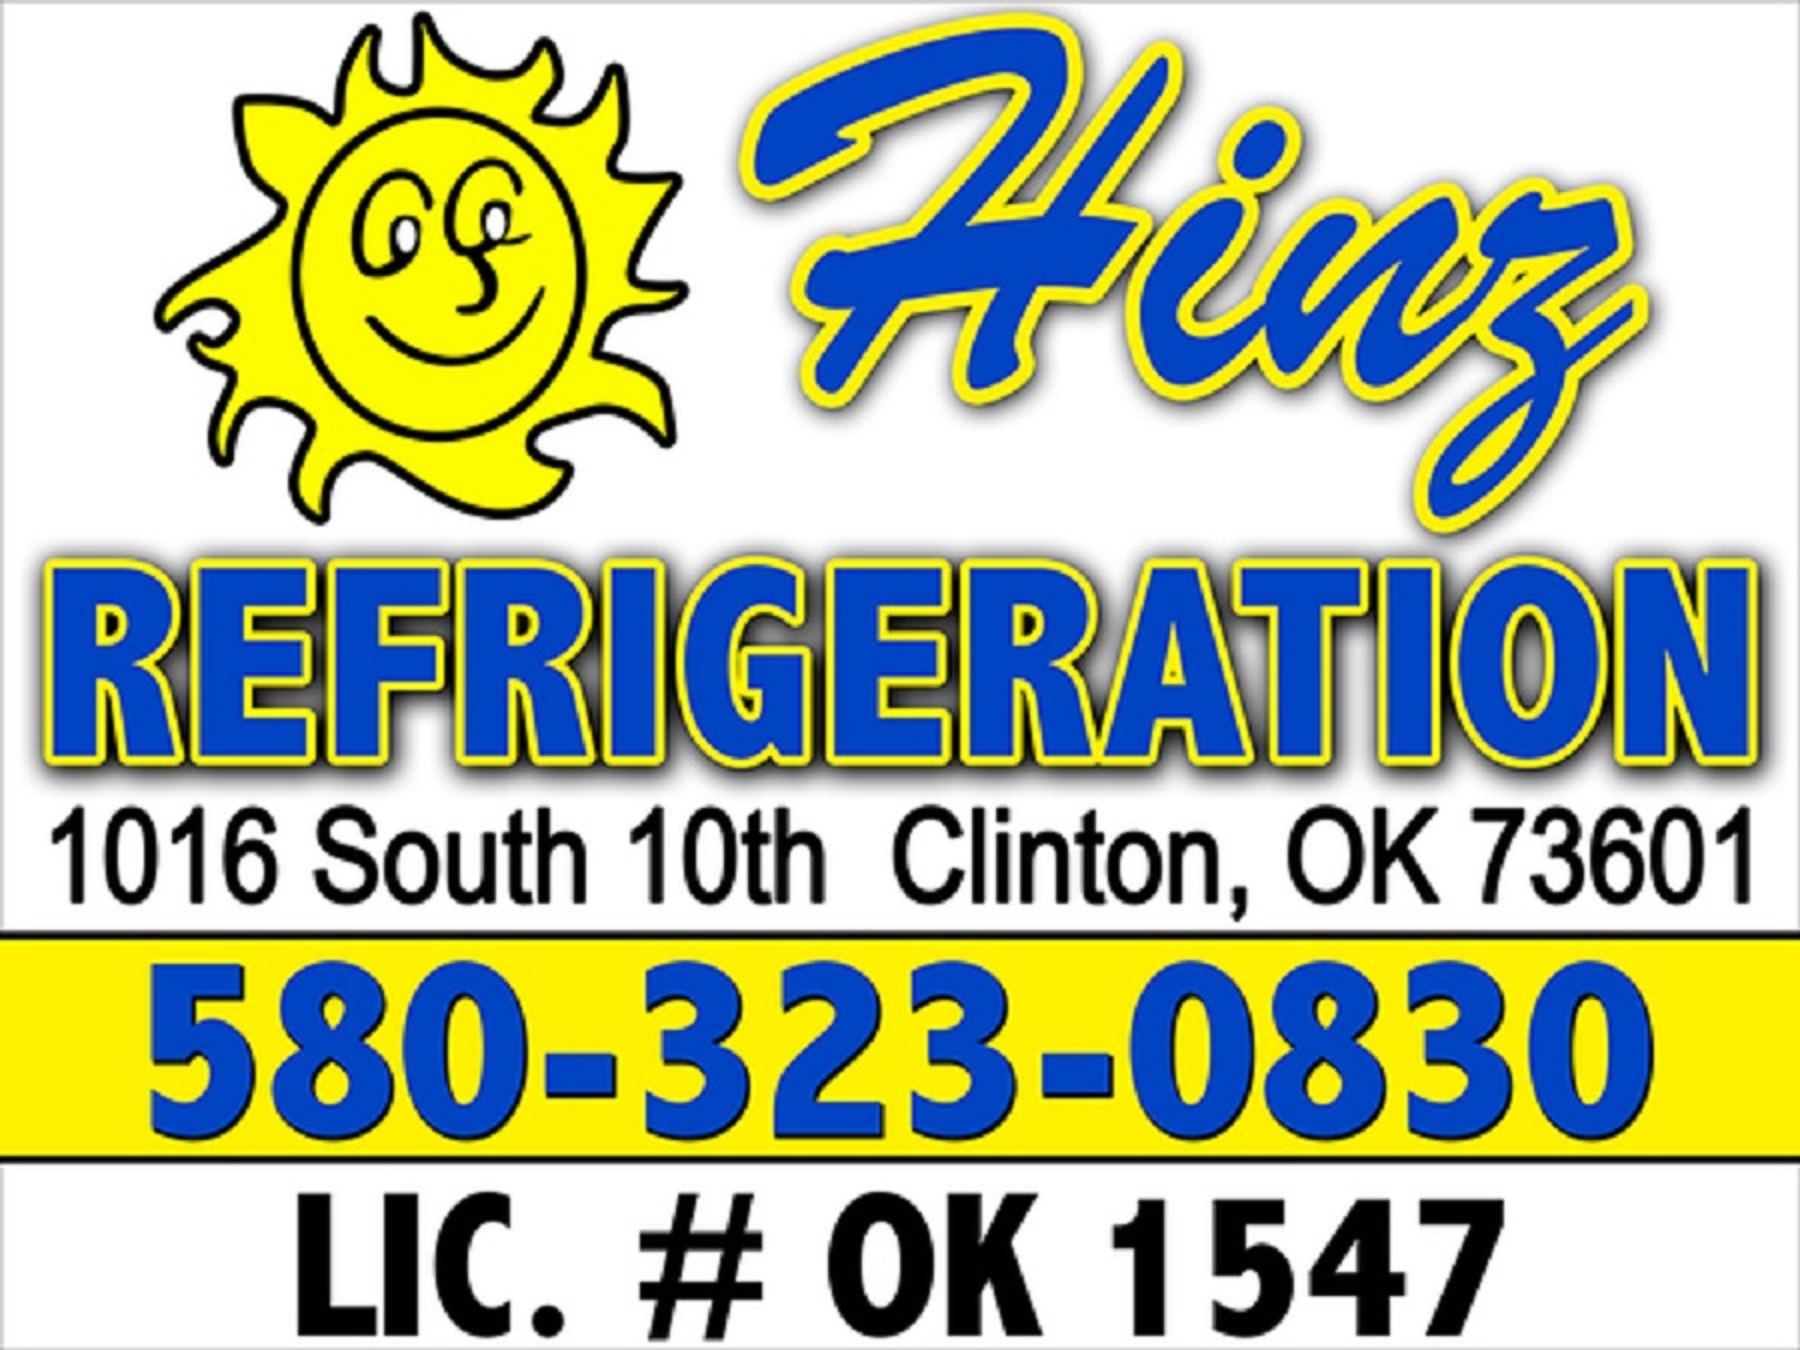 Hinz Refrigeration- Heating & Cooling 1016 S 10th St, Clinton Oklahoma 73601